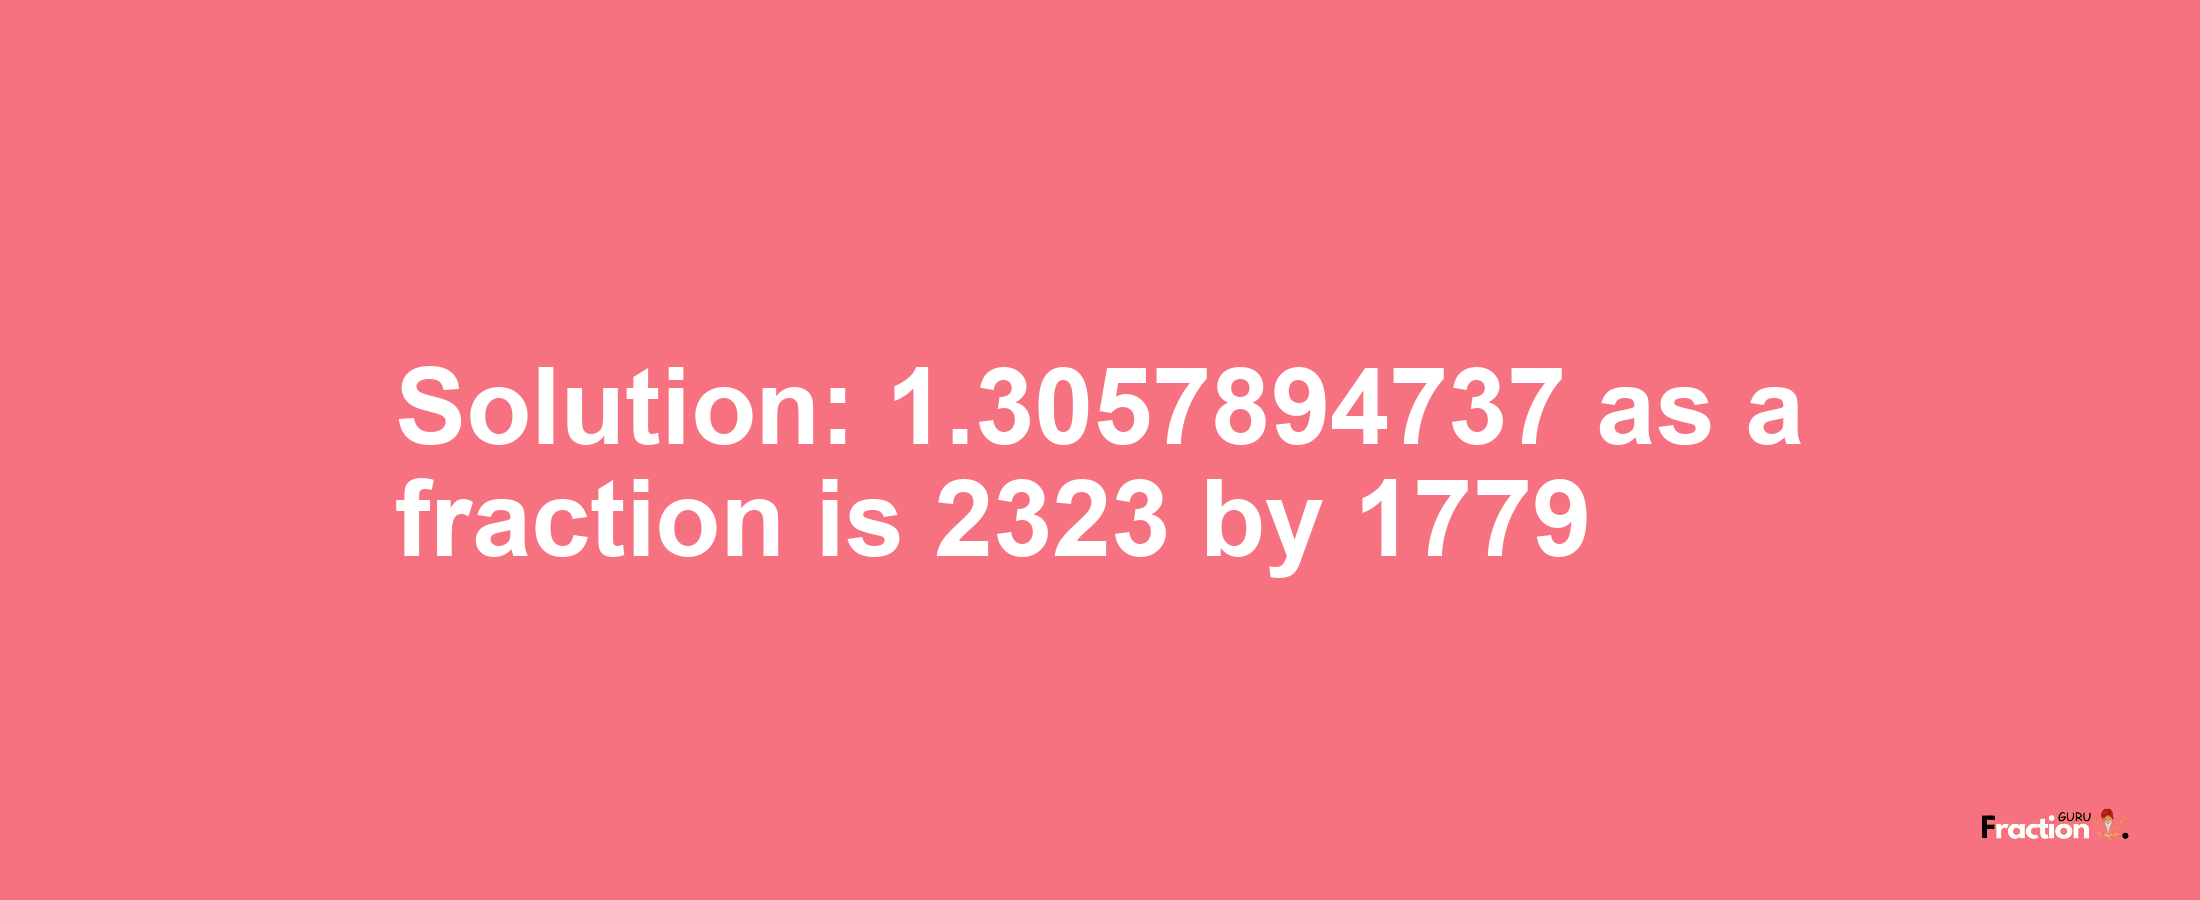 Solution:1.3057894737 as a fraction is 2323/1779